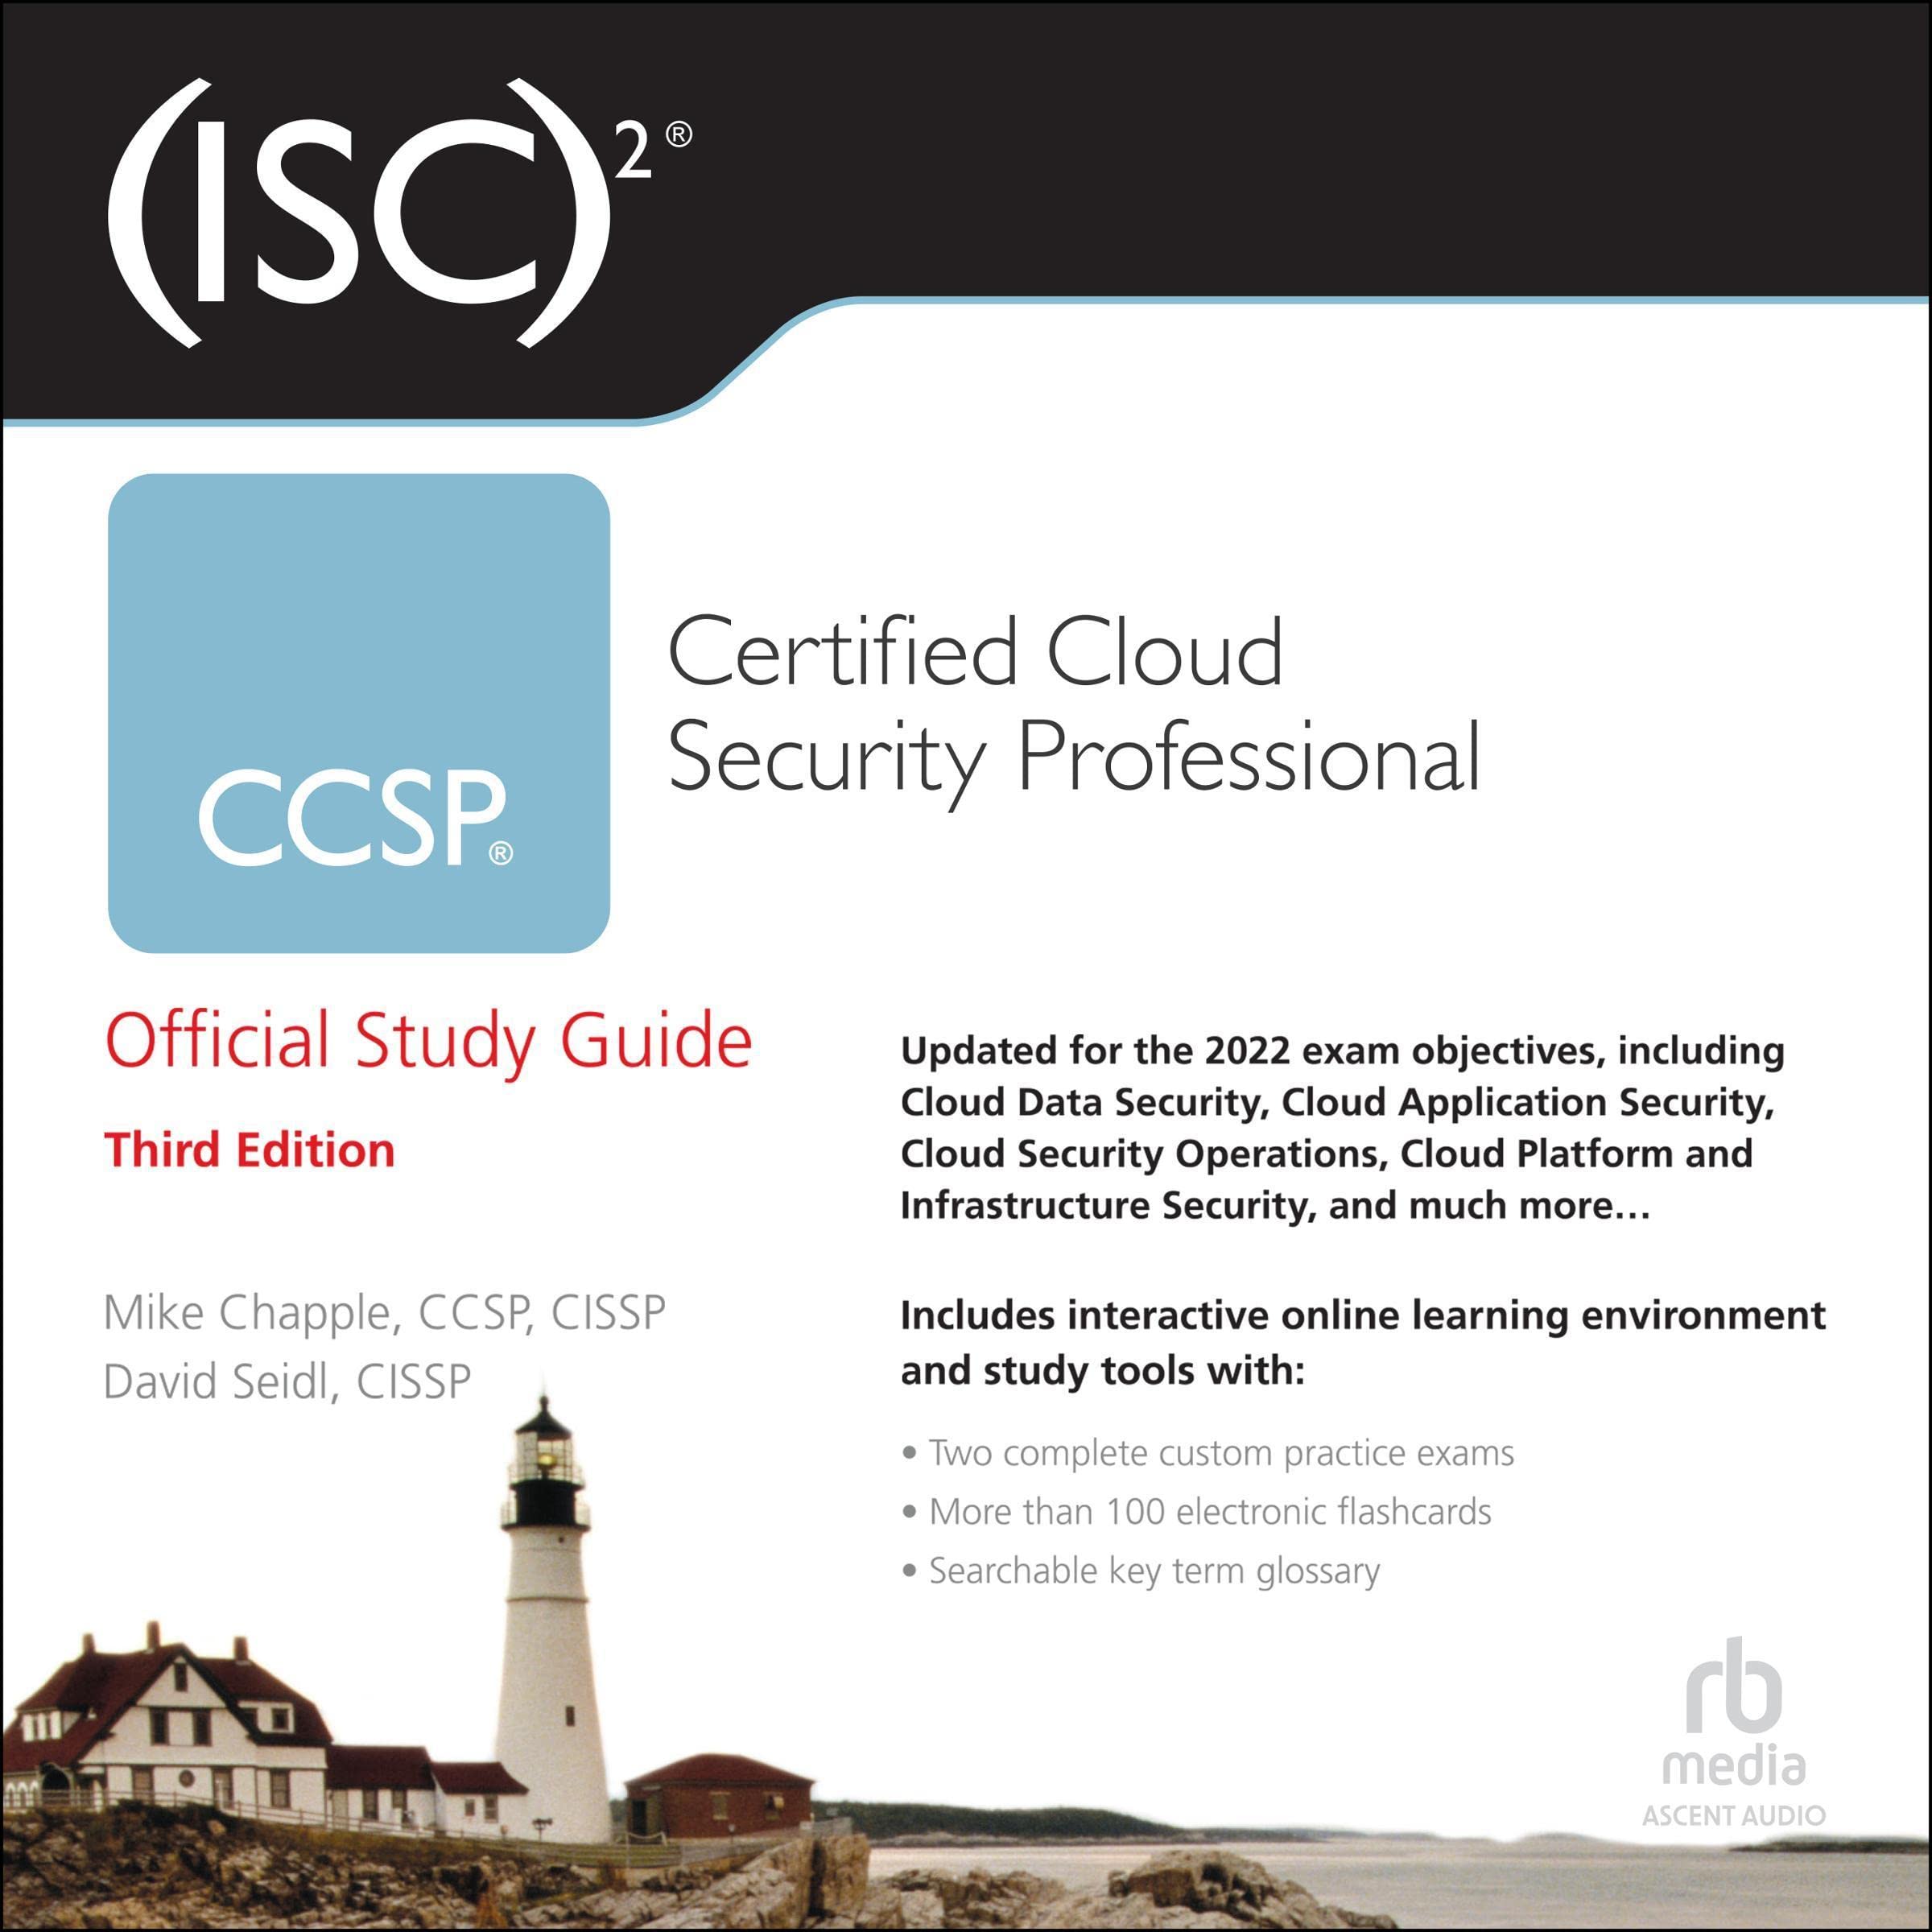 (ISC)2 CCSP Certified Cloud Security Professional Official Study Guide (3rd Edition)